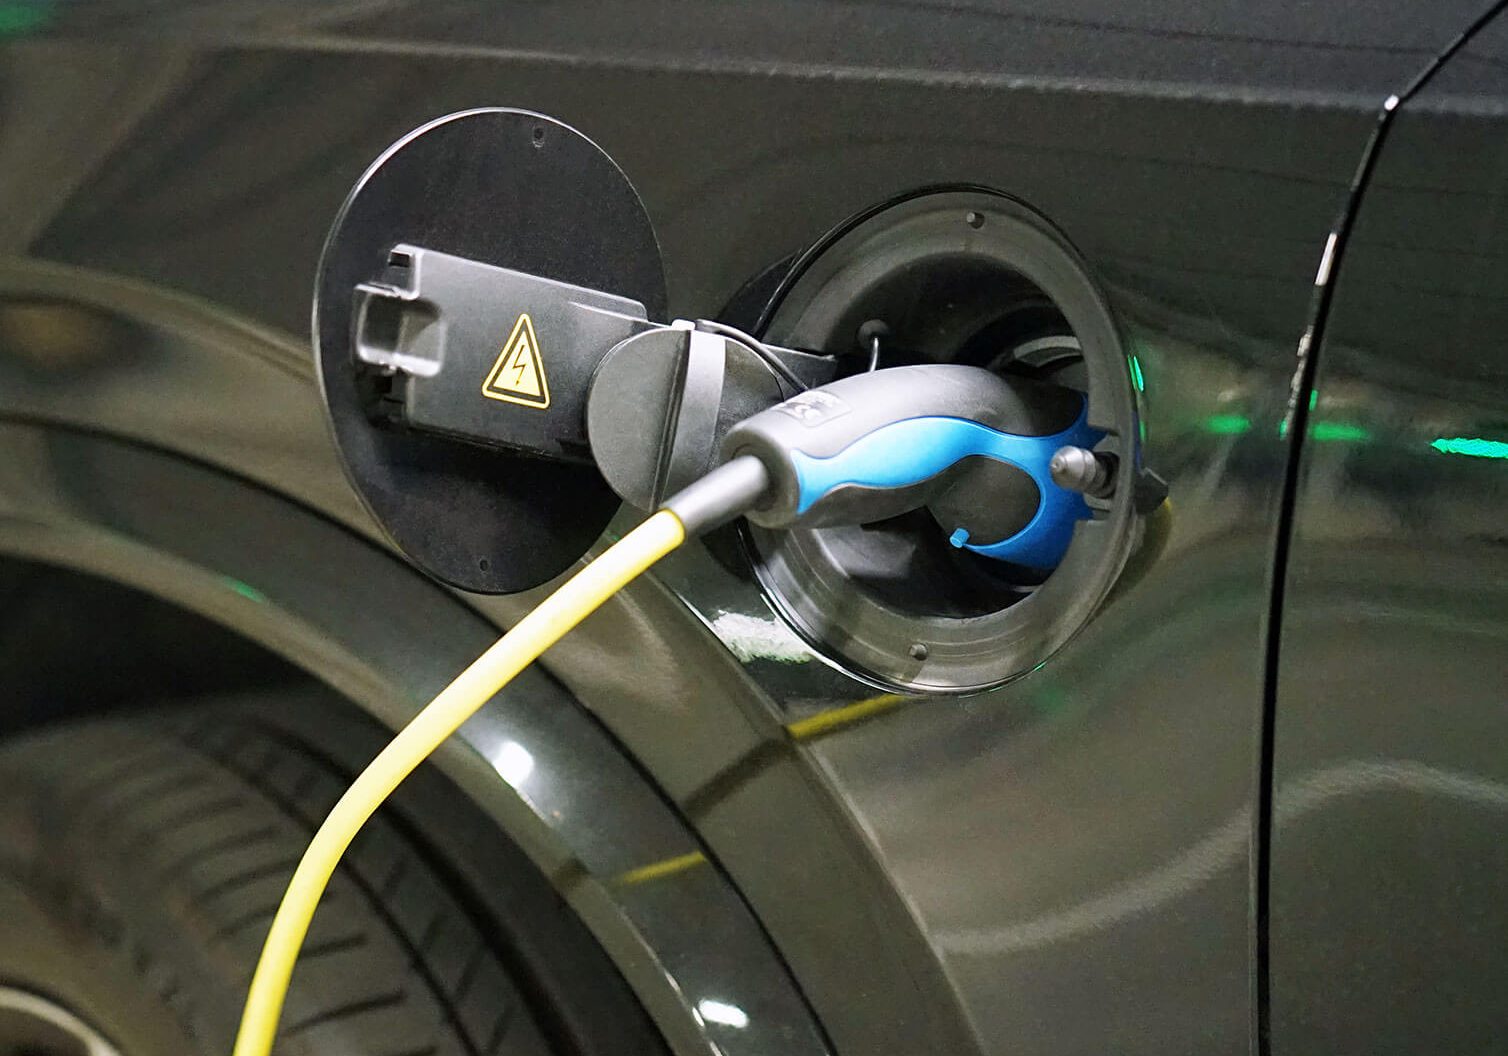 Electric car charger plugged into car